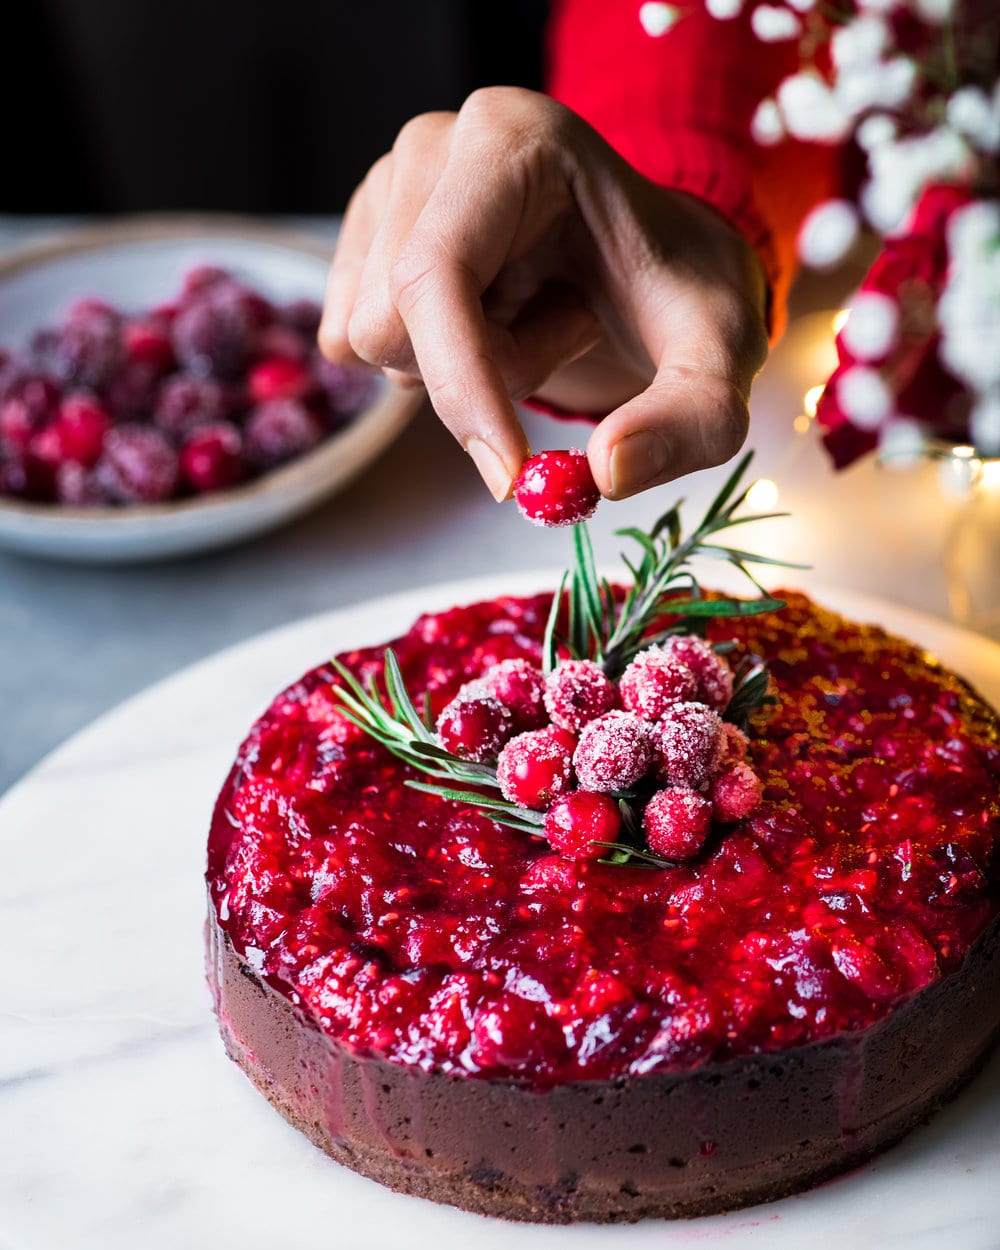 Person placing a cranberry onto cheesecake.